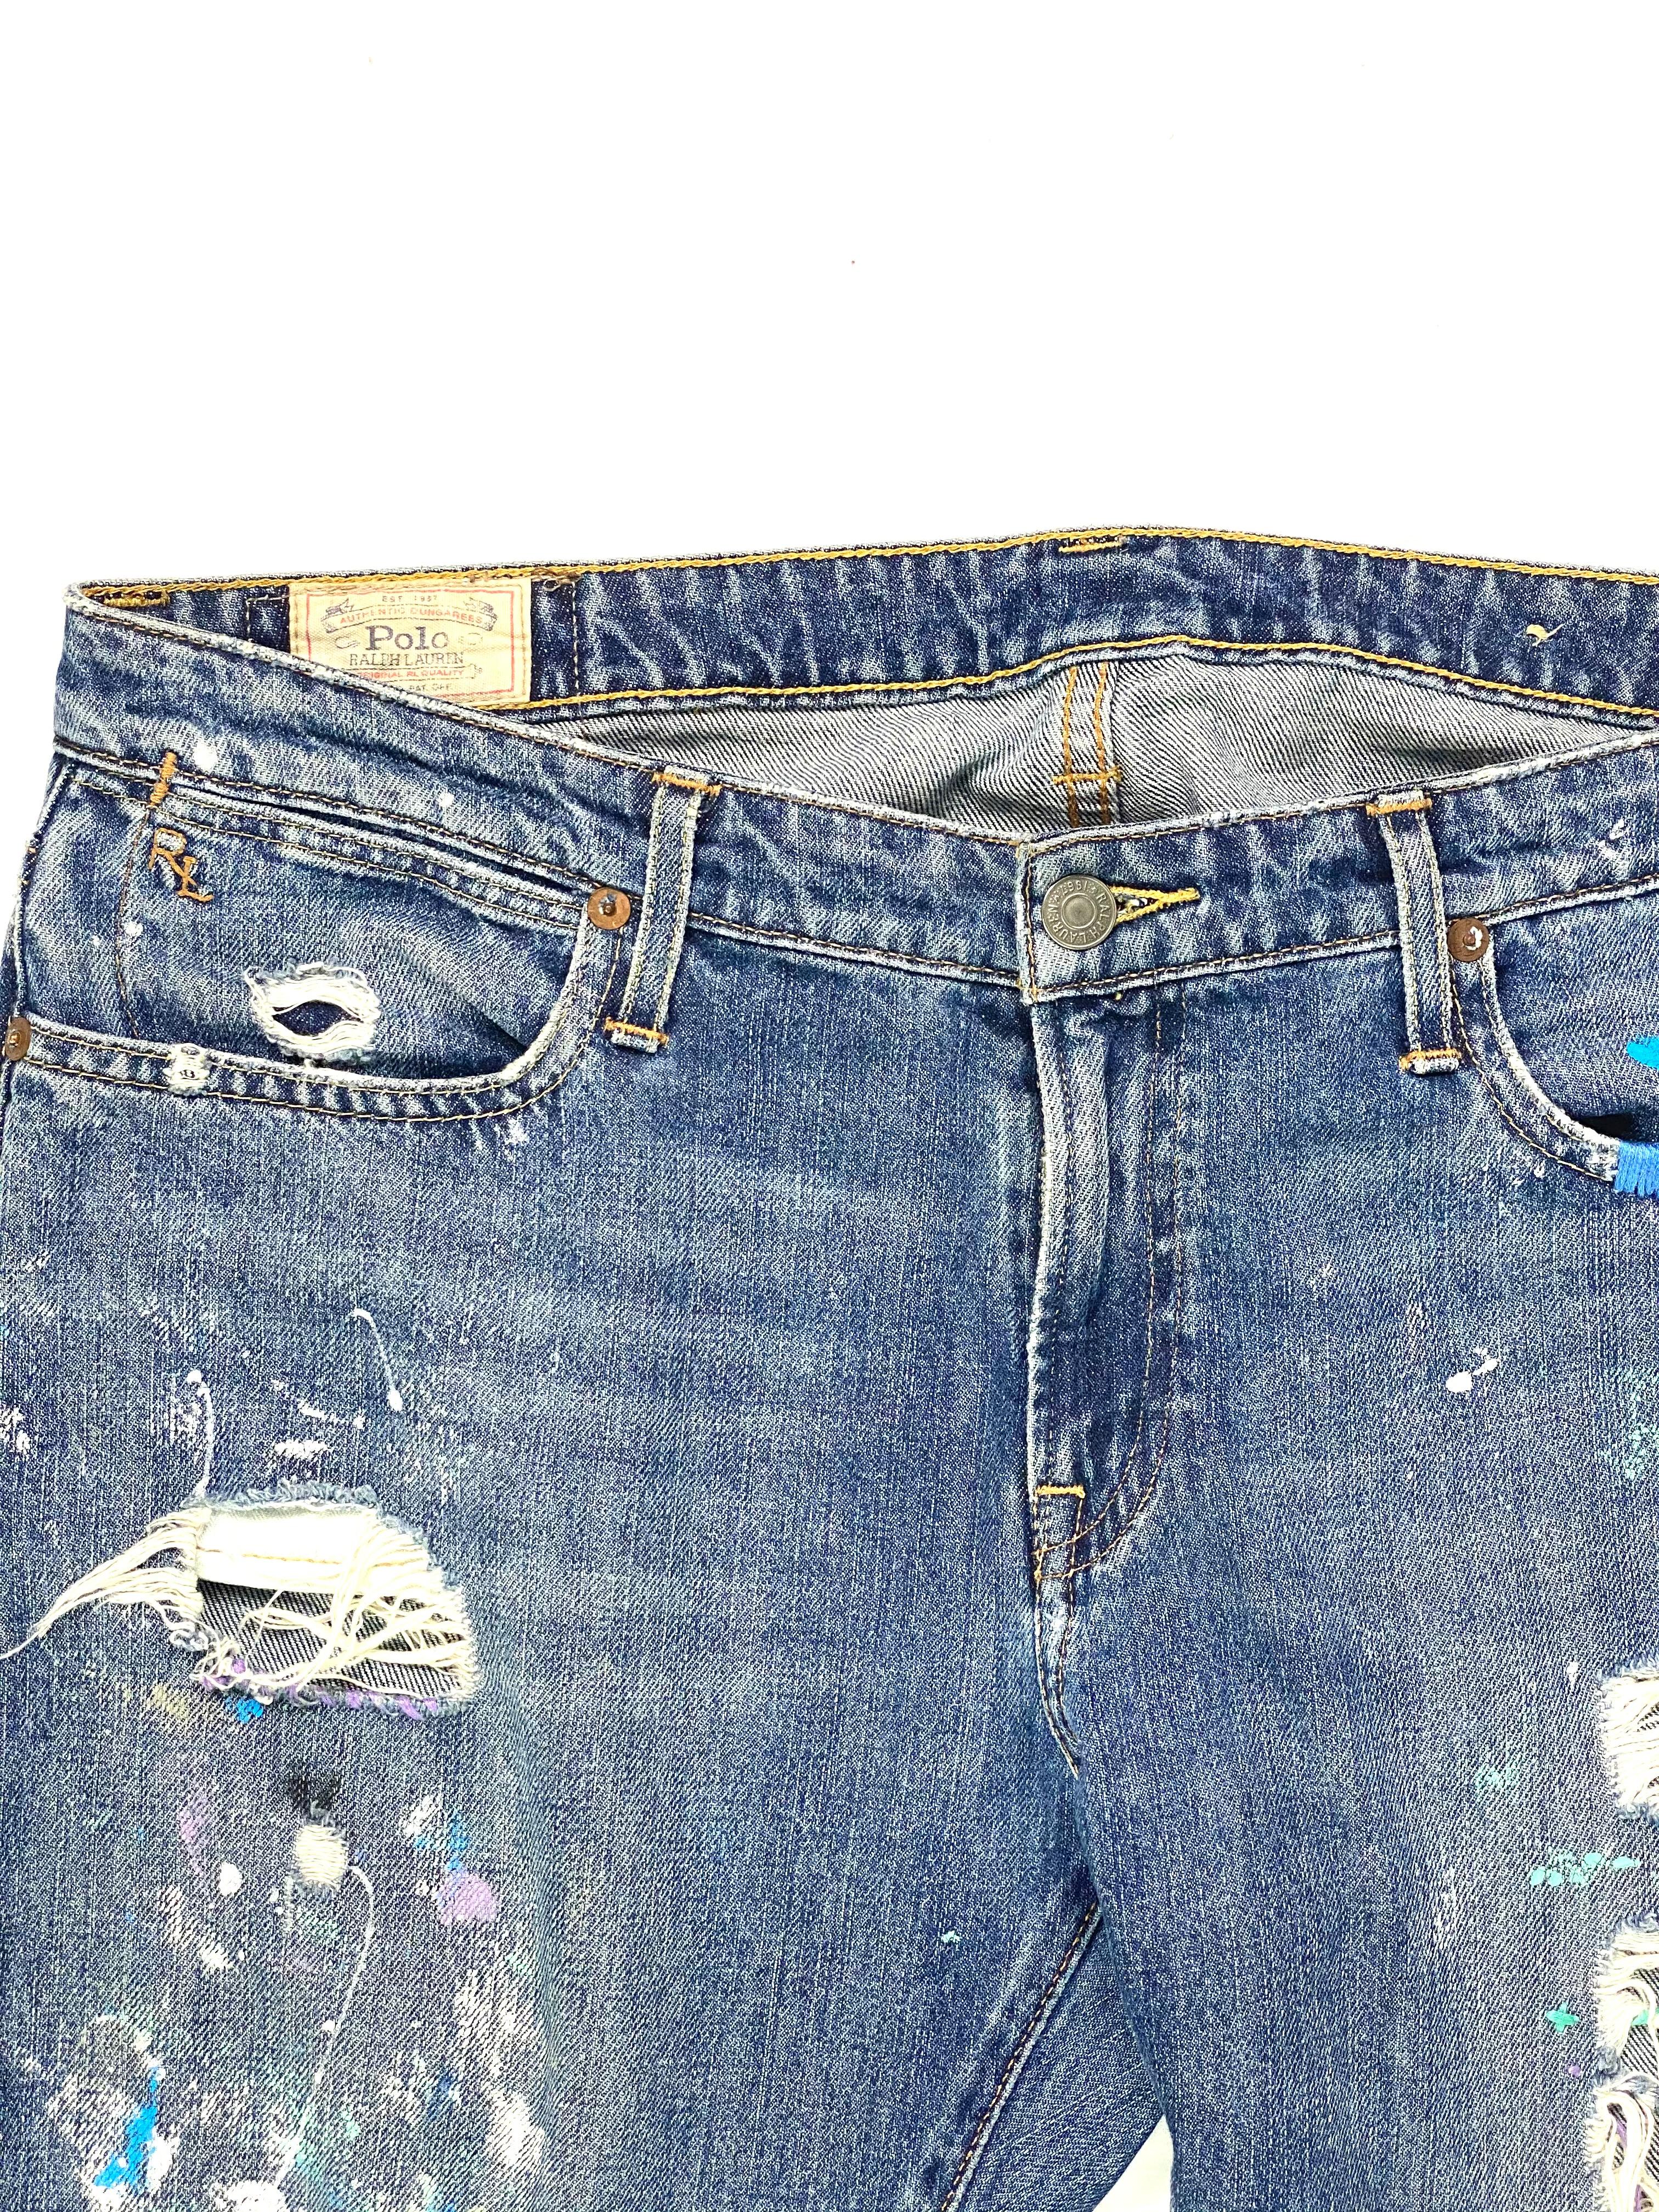 Product details:

The jeans feature light blue wash denim, distressed with multicolored paint over it, straight fit.